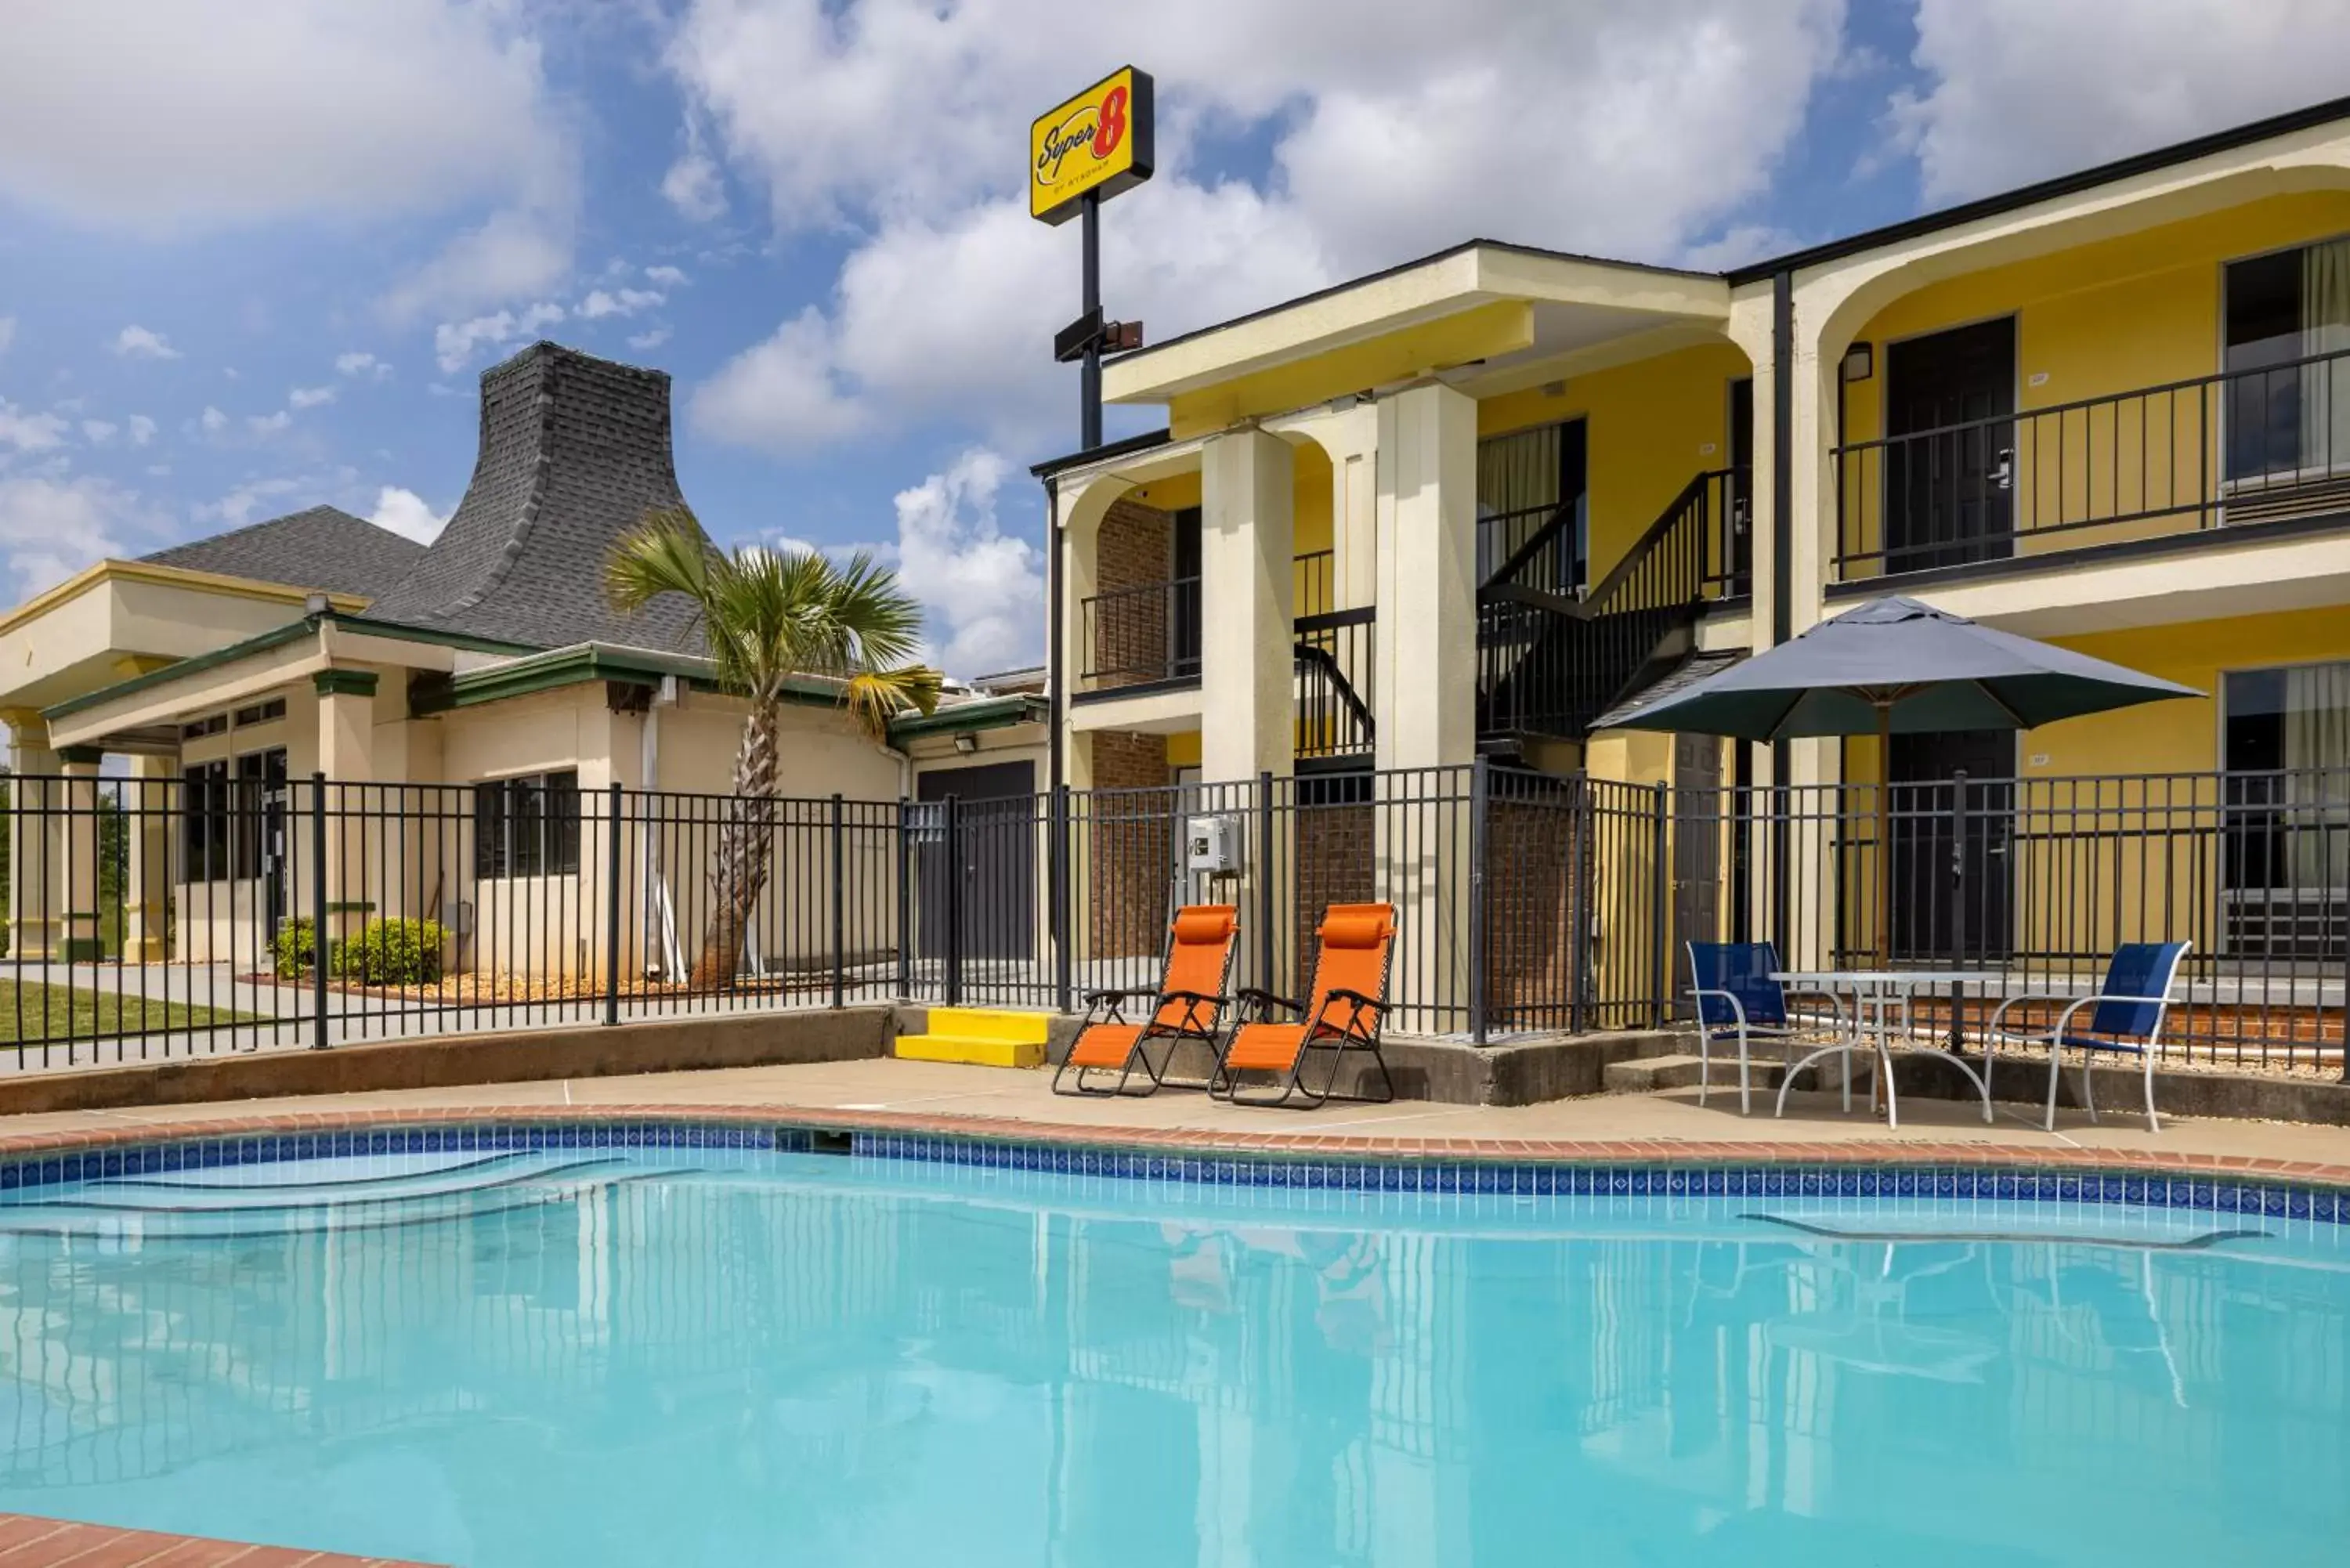 Swimming pool, Property Building in Super 8 by Wyndham McDonough GA